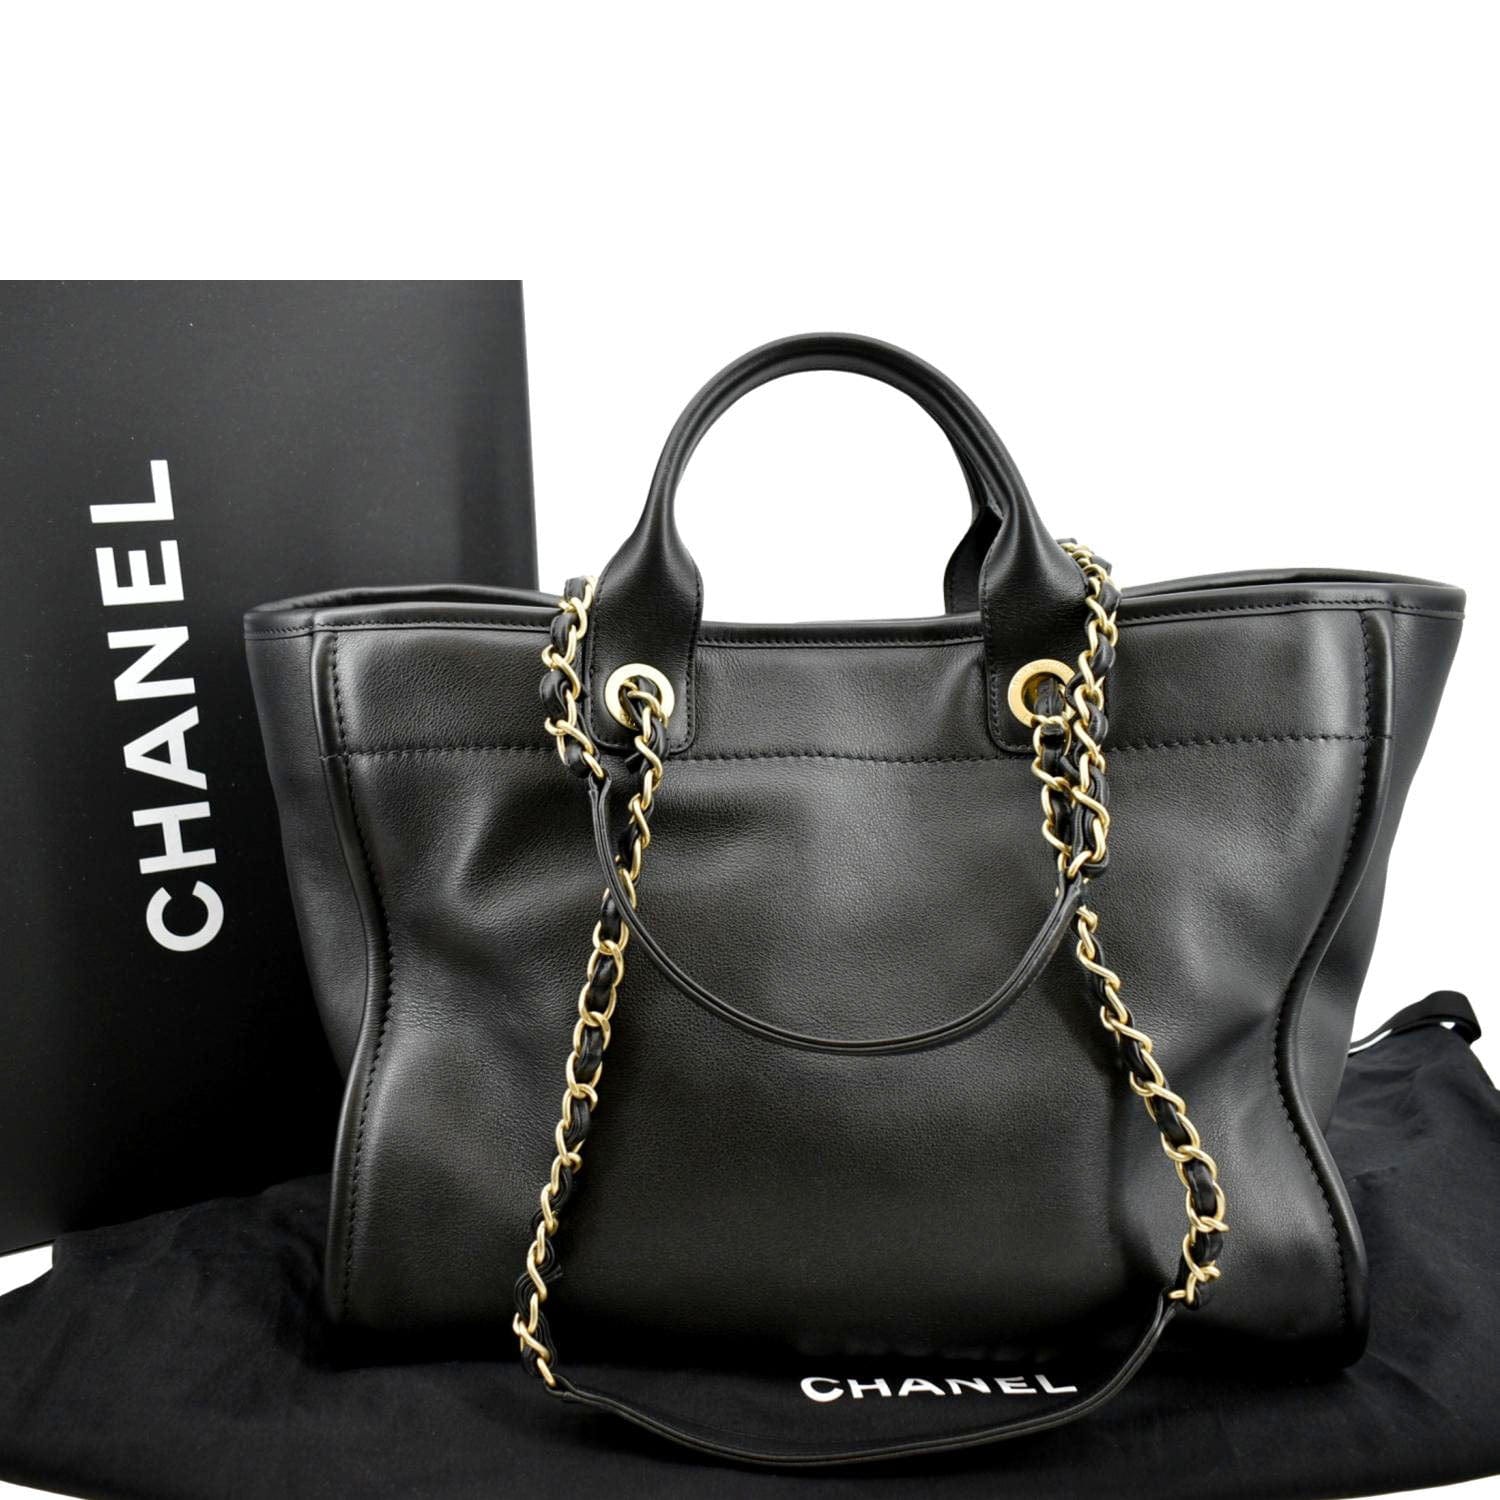 Chanel 2021 Medium Deauville Tote - ShopStyle